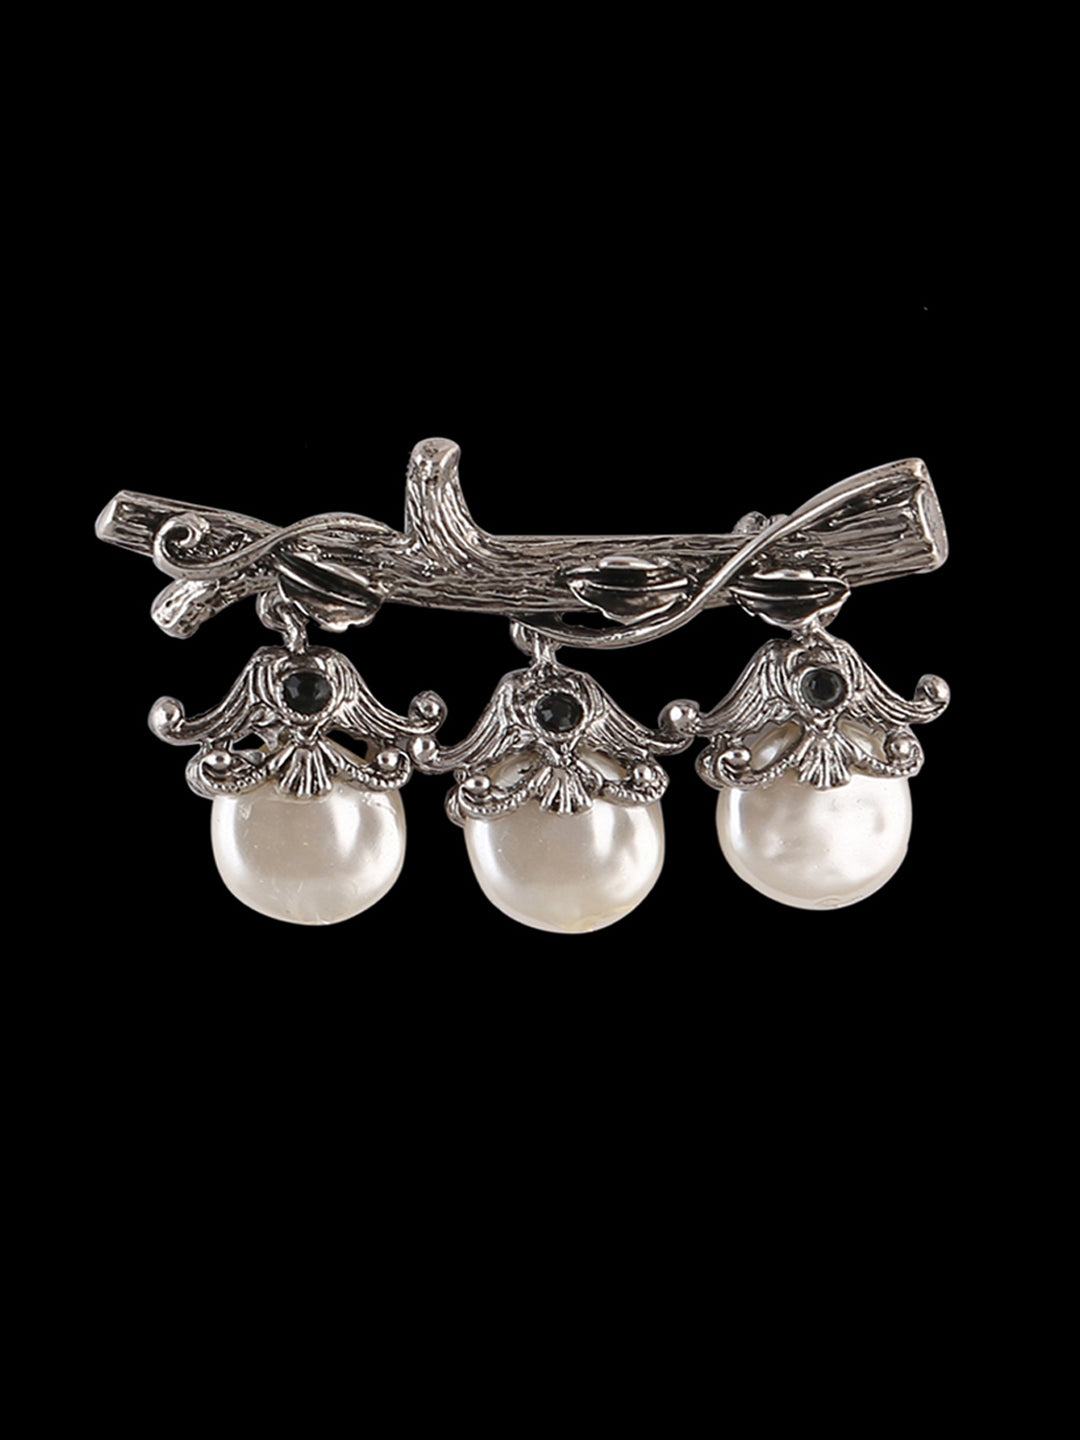 Very Charming Antique Silver Colour Vintage Look with Pearl Hanging Brooch